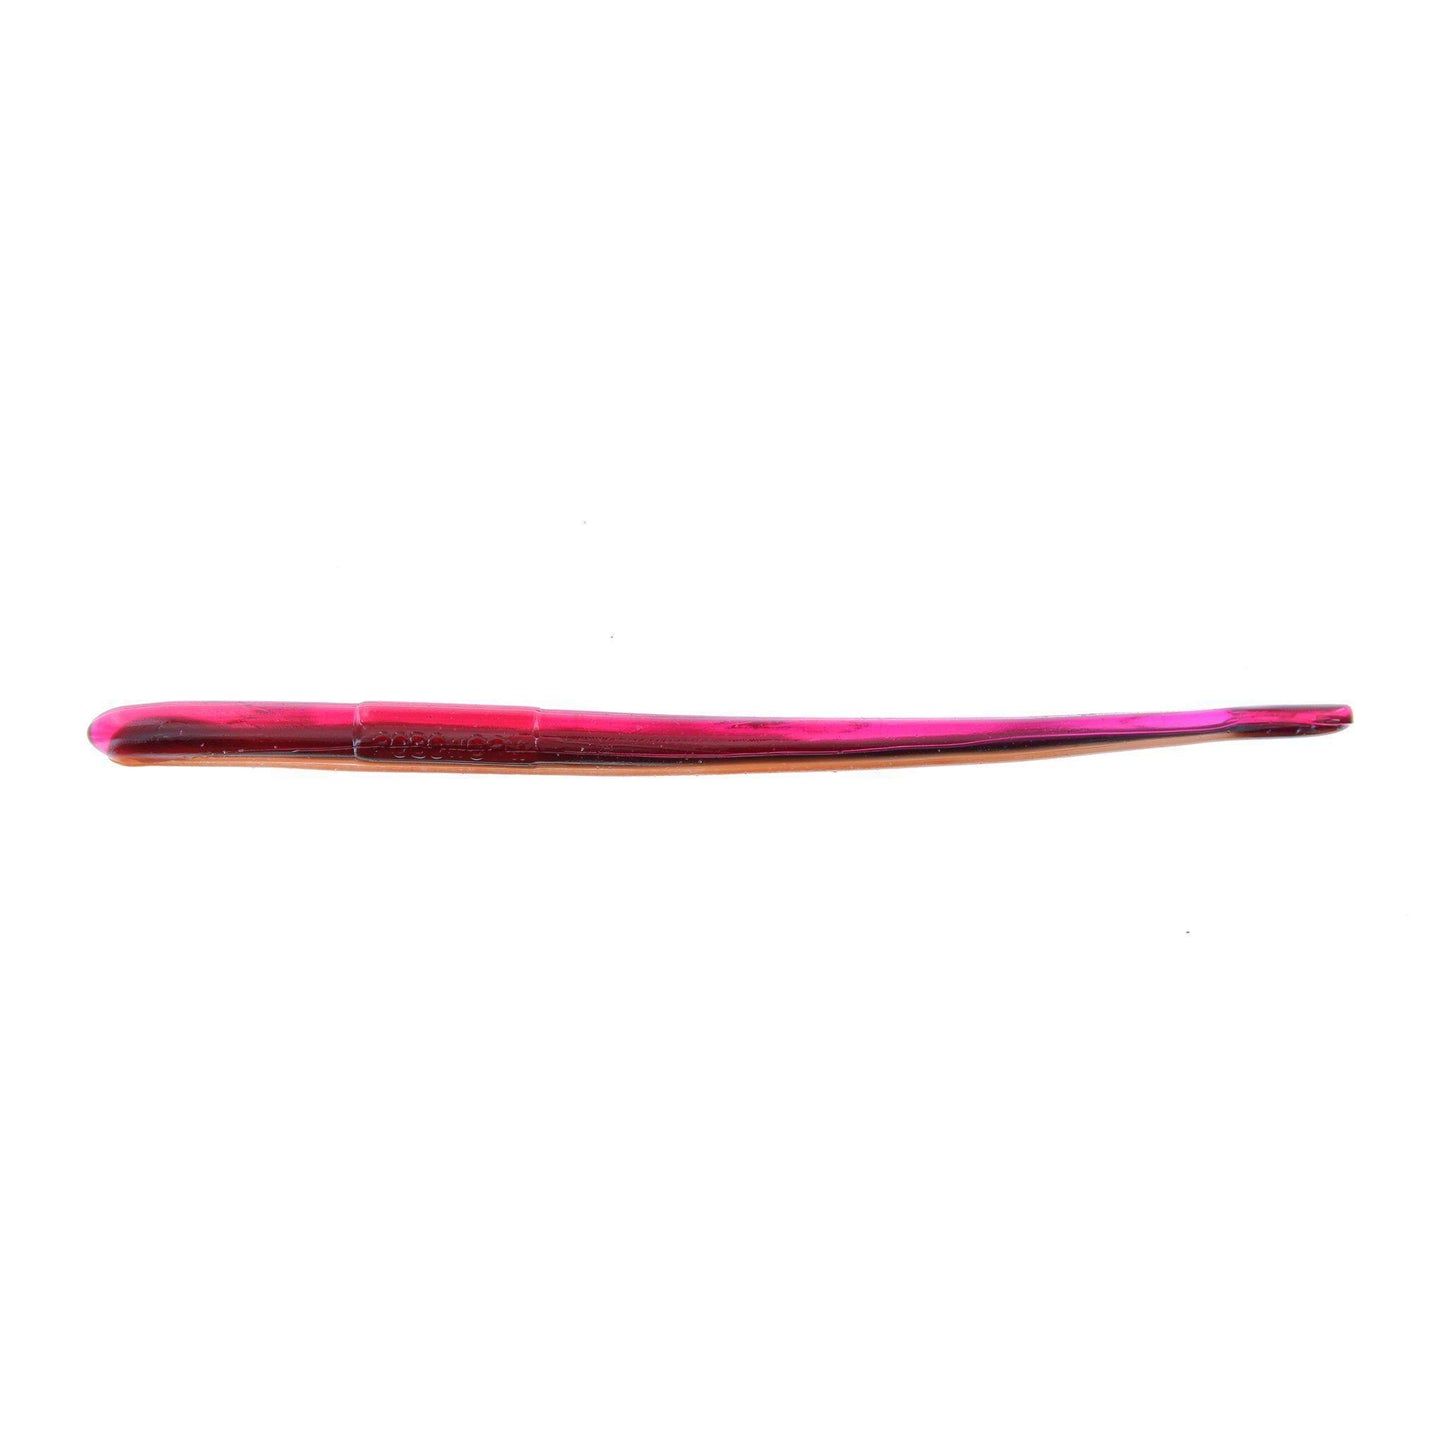 Roboworm Straight Tail 6" Sr-Hj0 Red Craw 10Pk